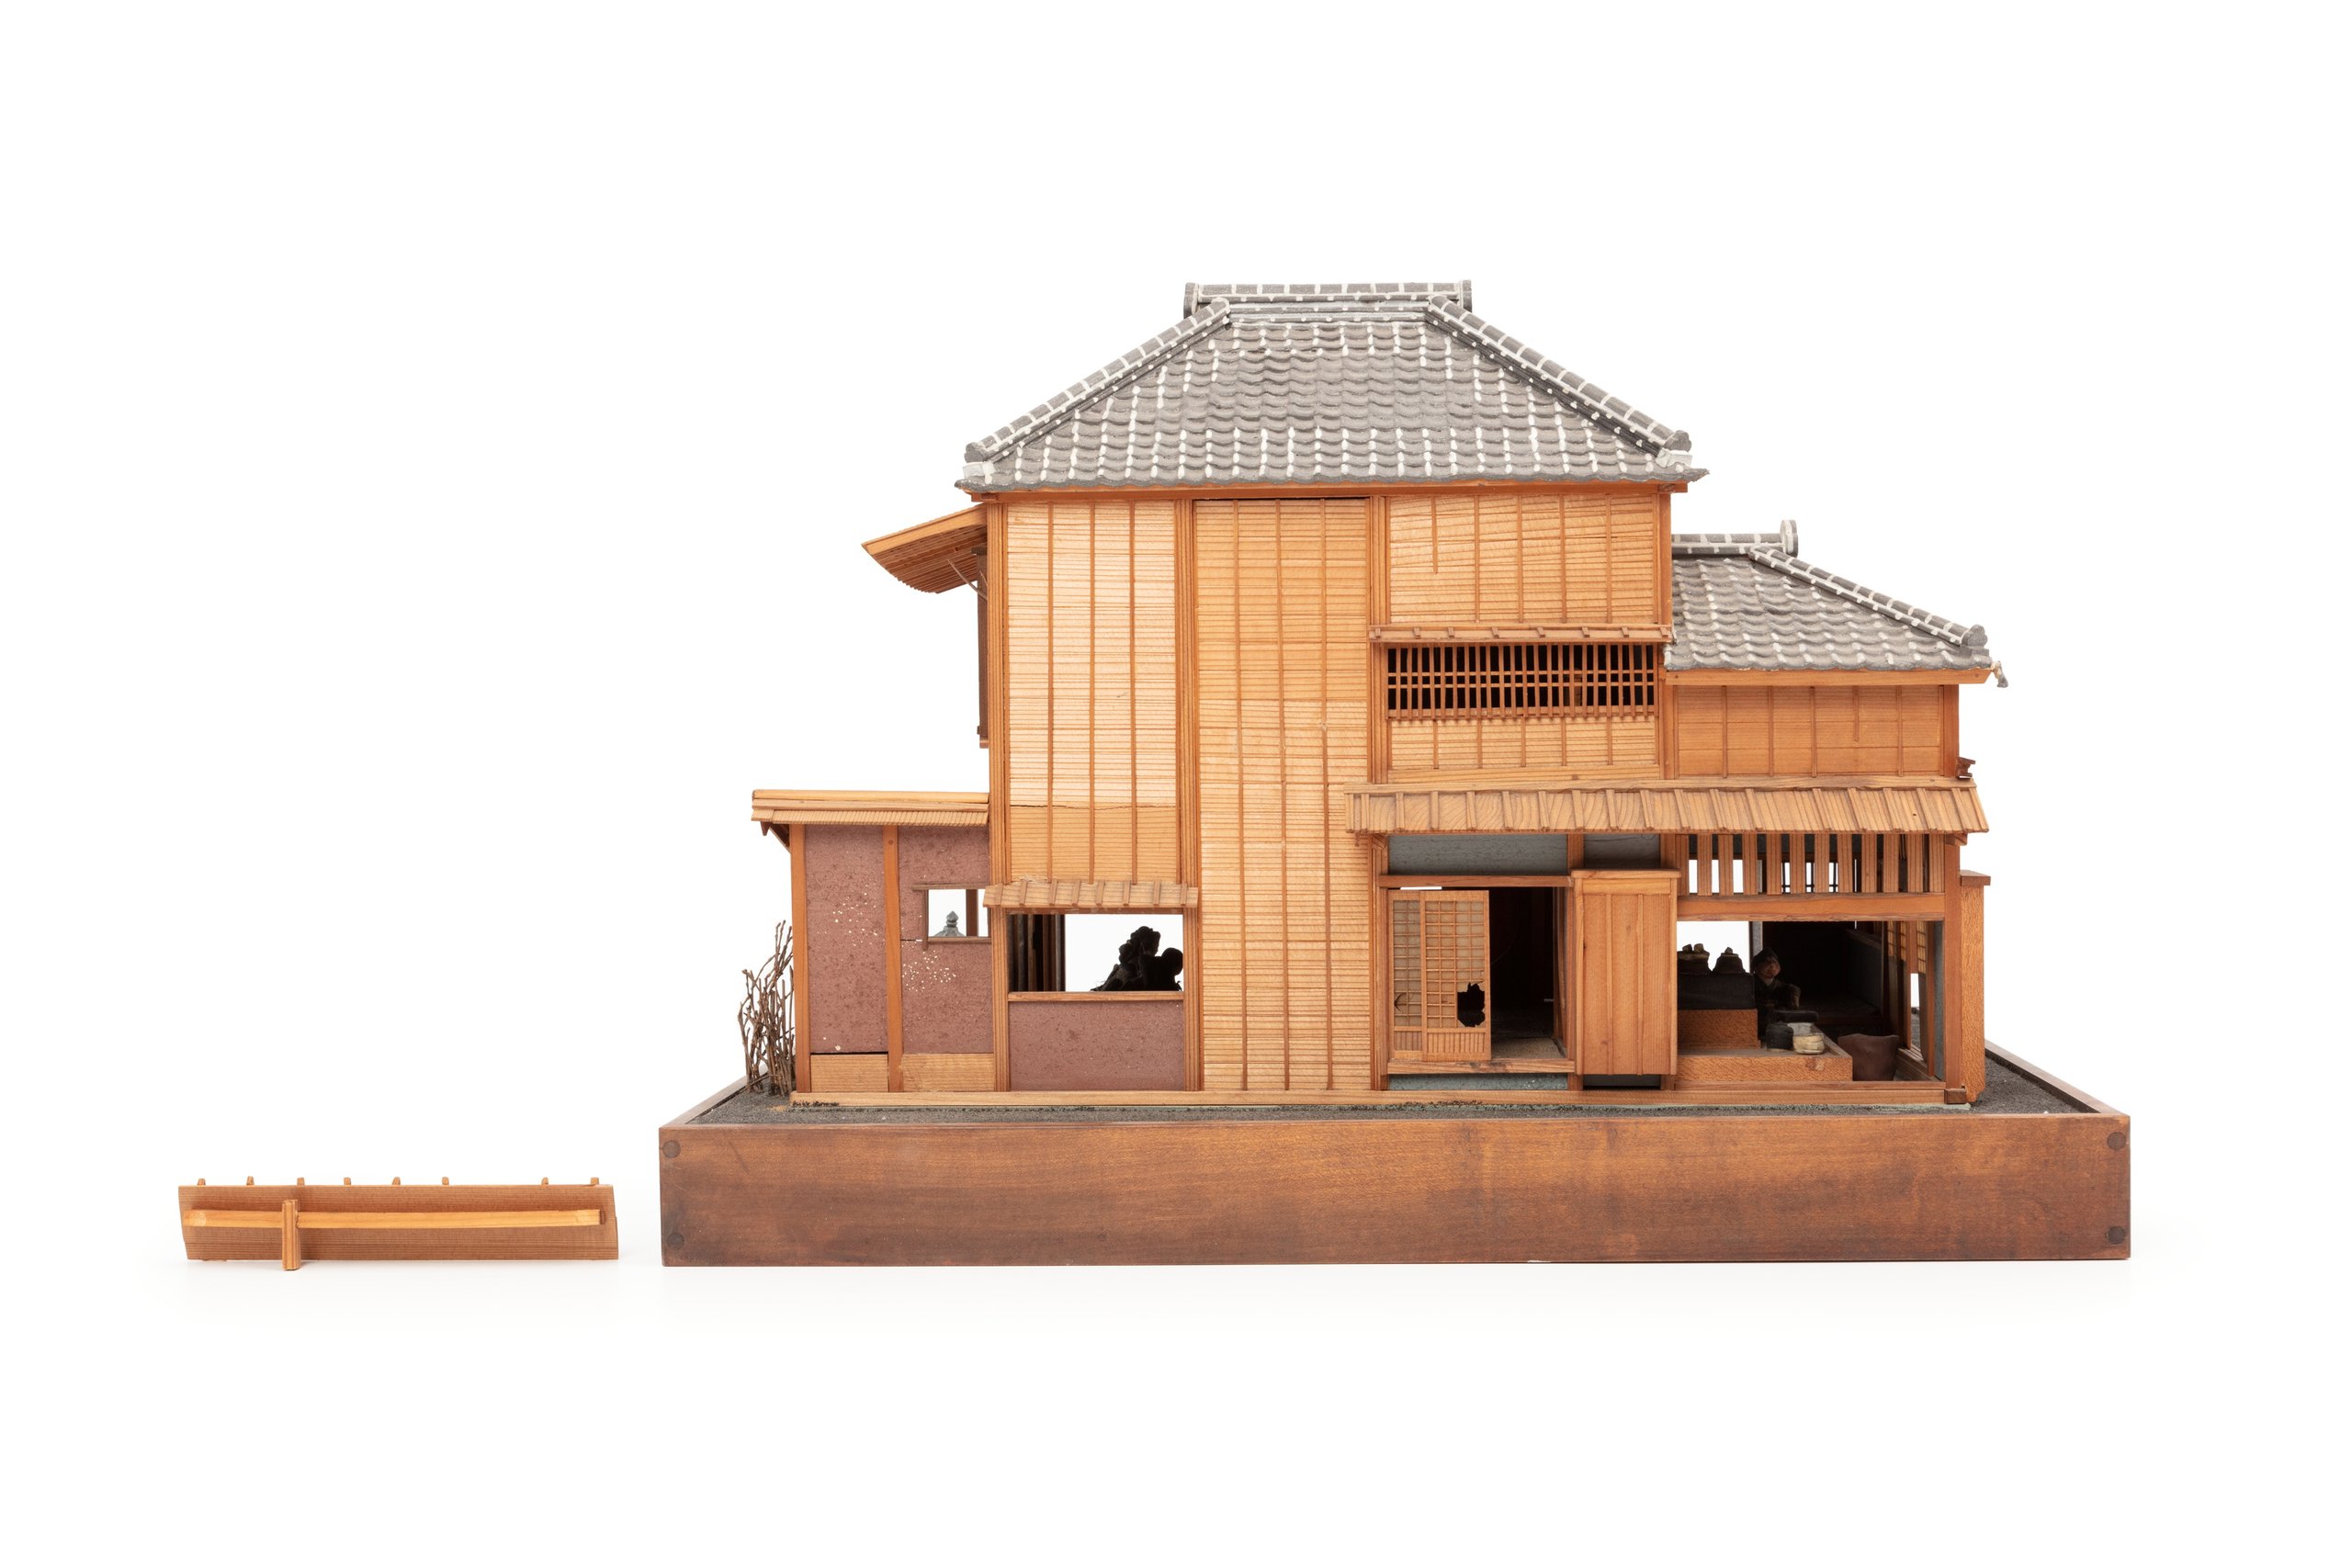 Architectural model of a Japanese country house